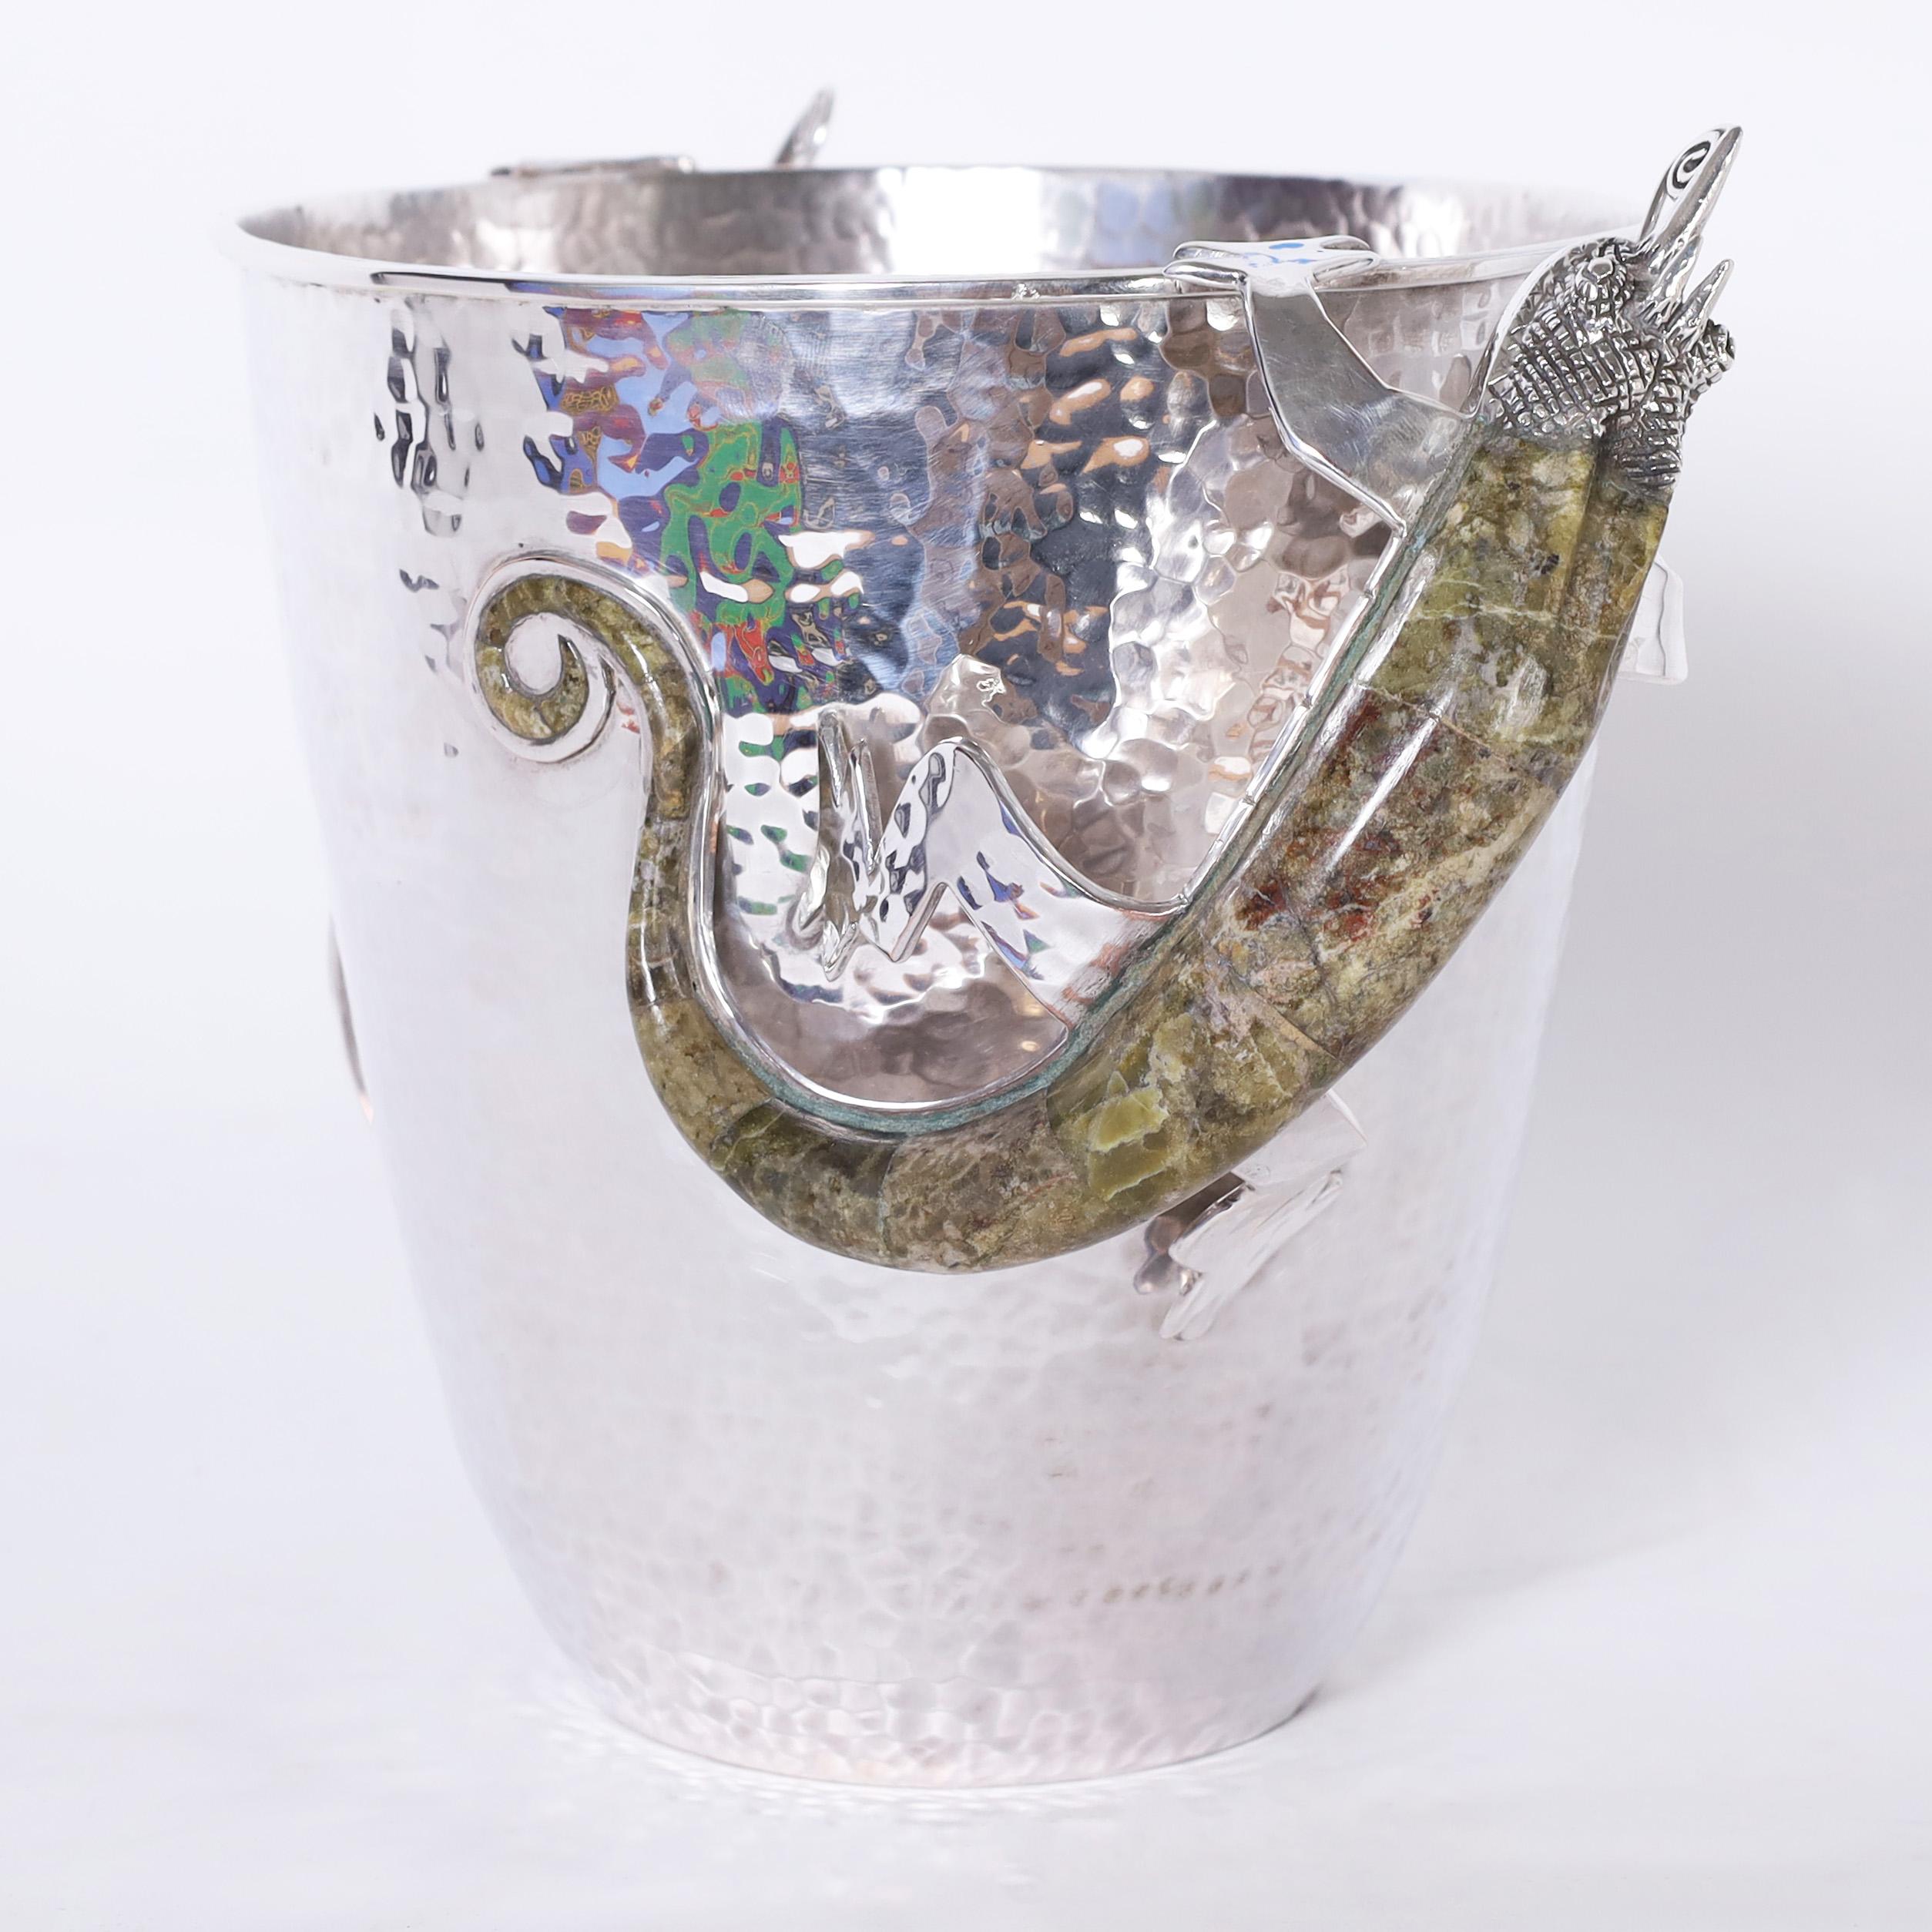 Stand out mid century ice bucket handcrafted in silver plate over copper featuring lizards with stone backs and coiled tongues as handles. Stamped Wolmar Castillo on the bottom.